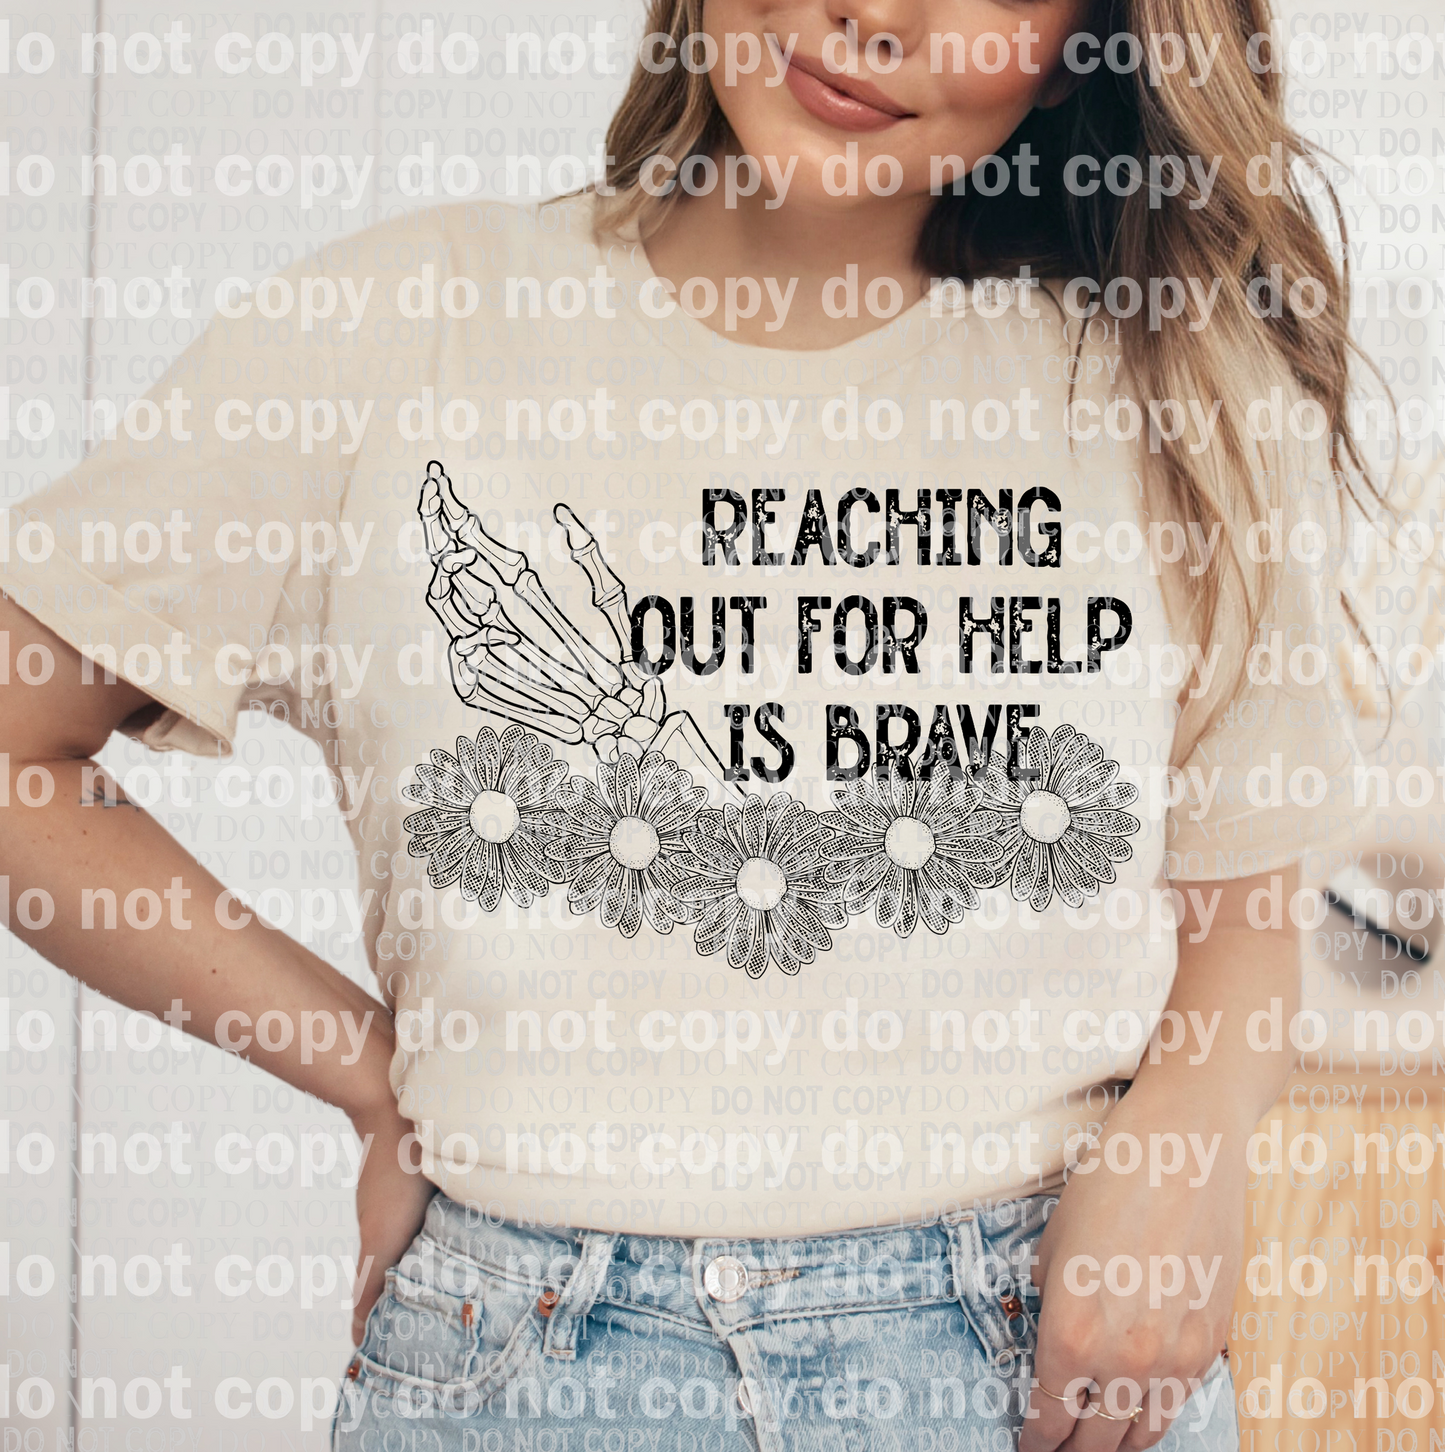 Reaching Out For Help Is Brave Full Color/One Color Dream Print or Sublimation Print